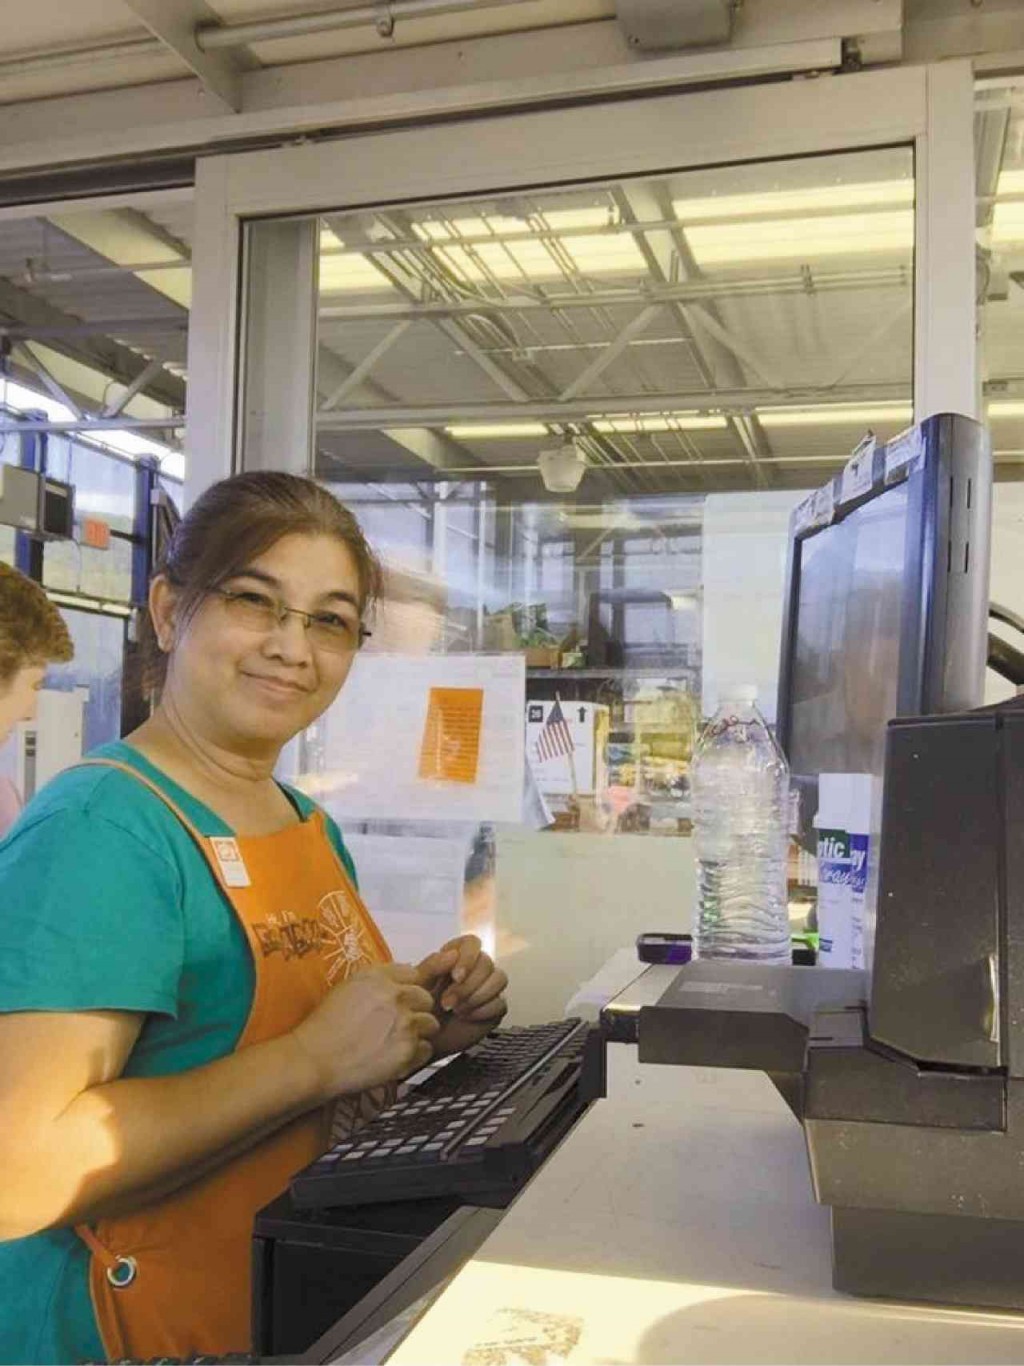 CAREER SHIFT Emma Hernandez Baltazar is now a sales associate in Home Depot after her stint as a physical education teacher in several New York City middle schools. She says, “What is important is we are happy in what we are doing.”  